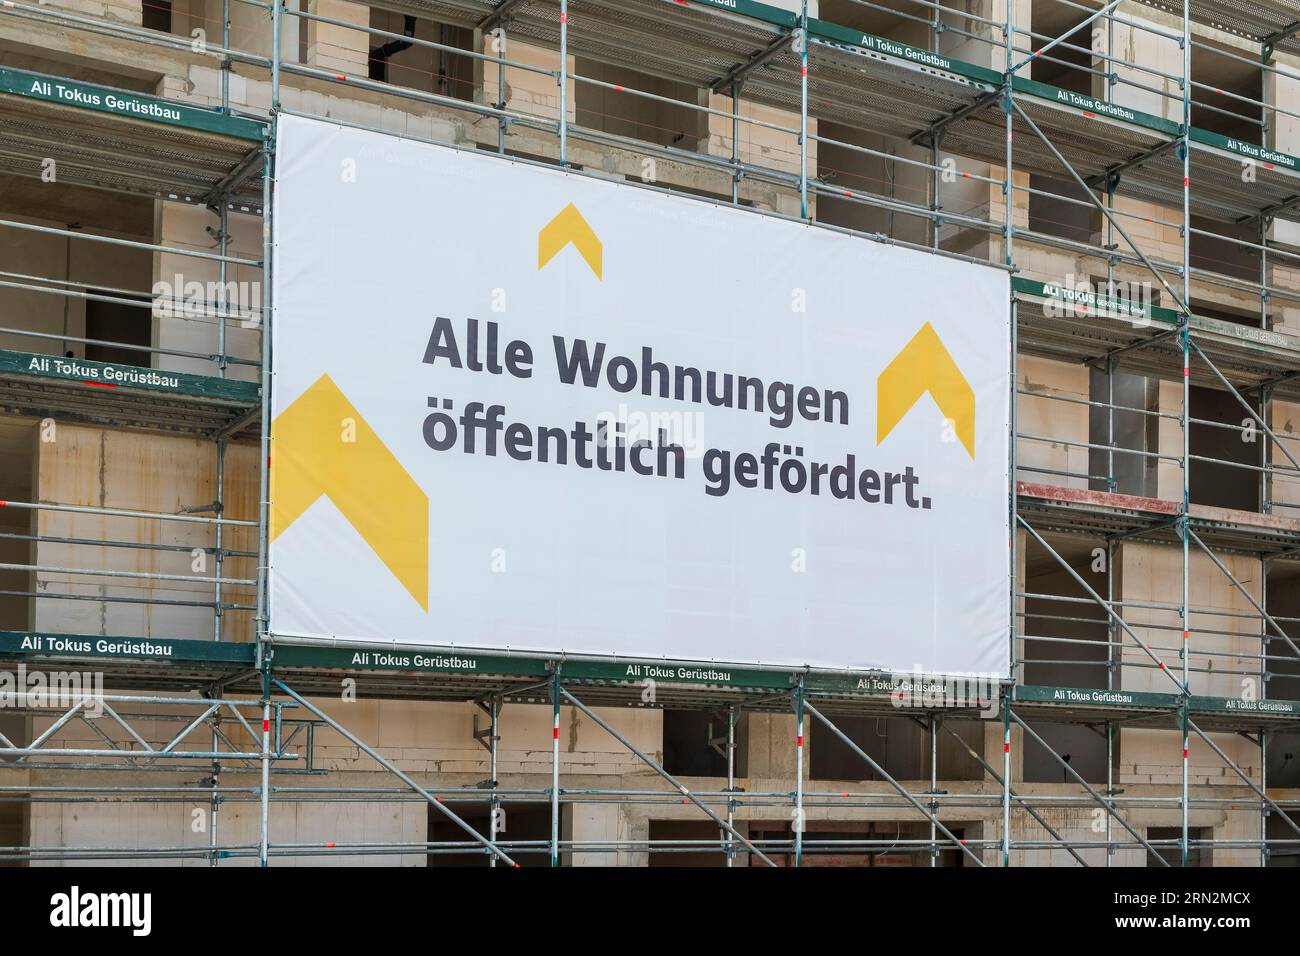 Construction site where flats are being built with scaffolding on which a banner hangs indicating that the flats are publicly funded. Stock Photo